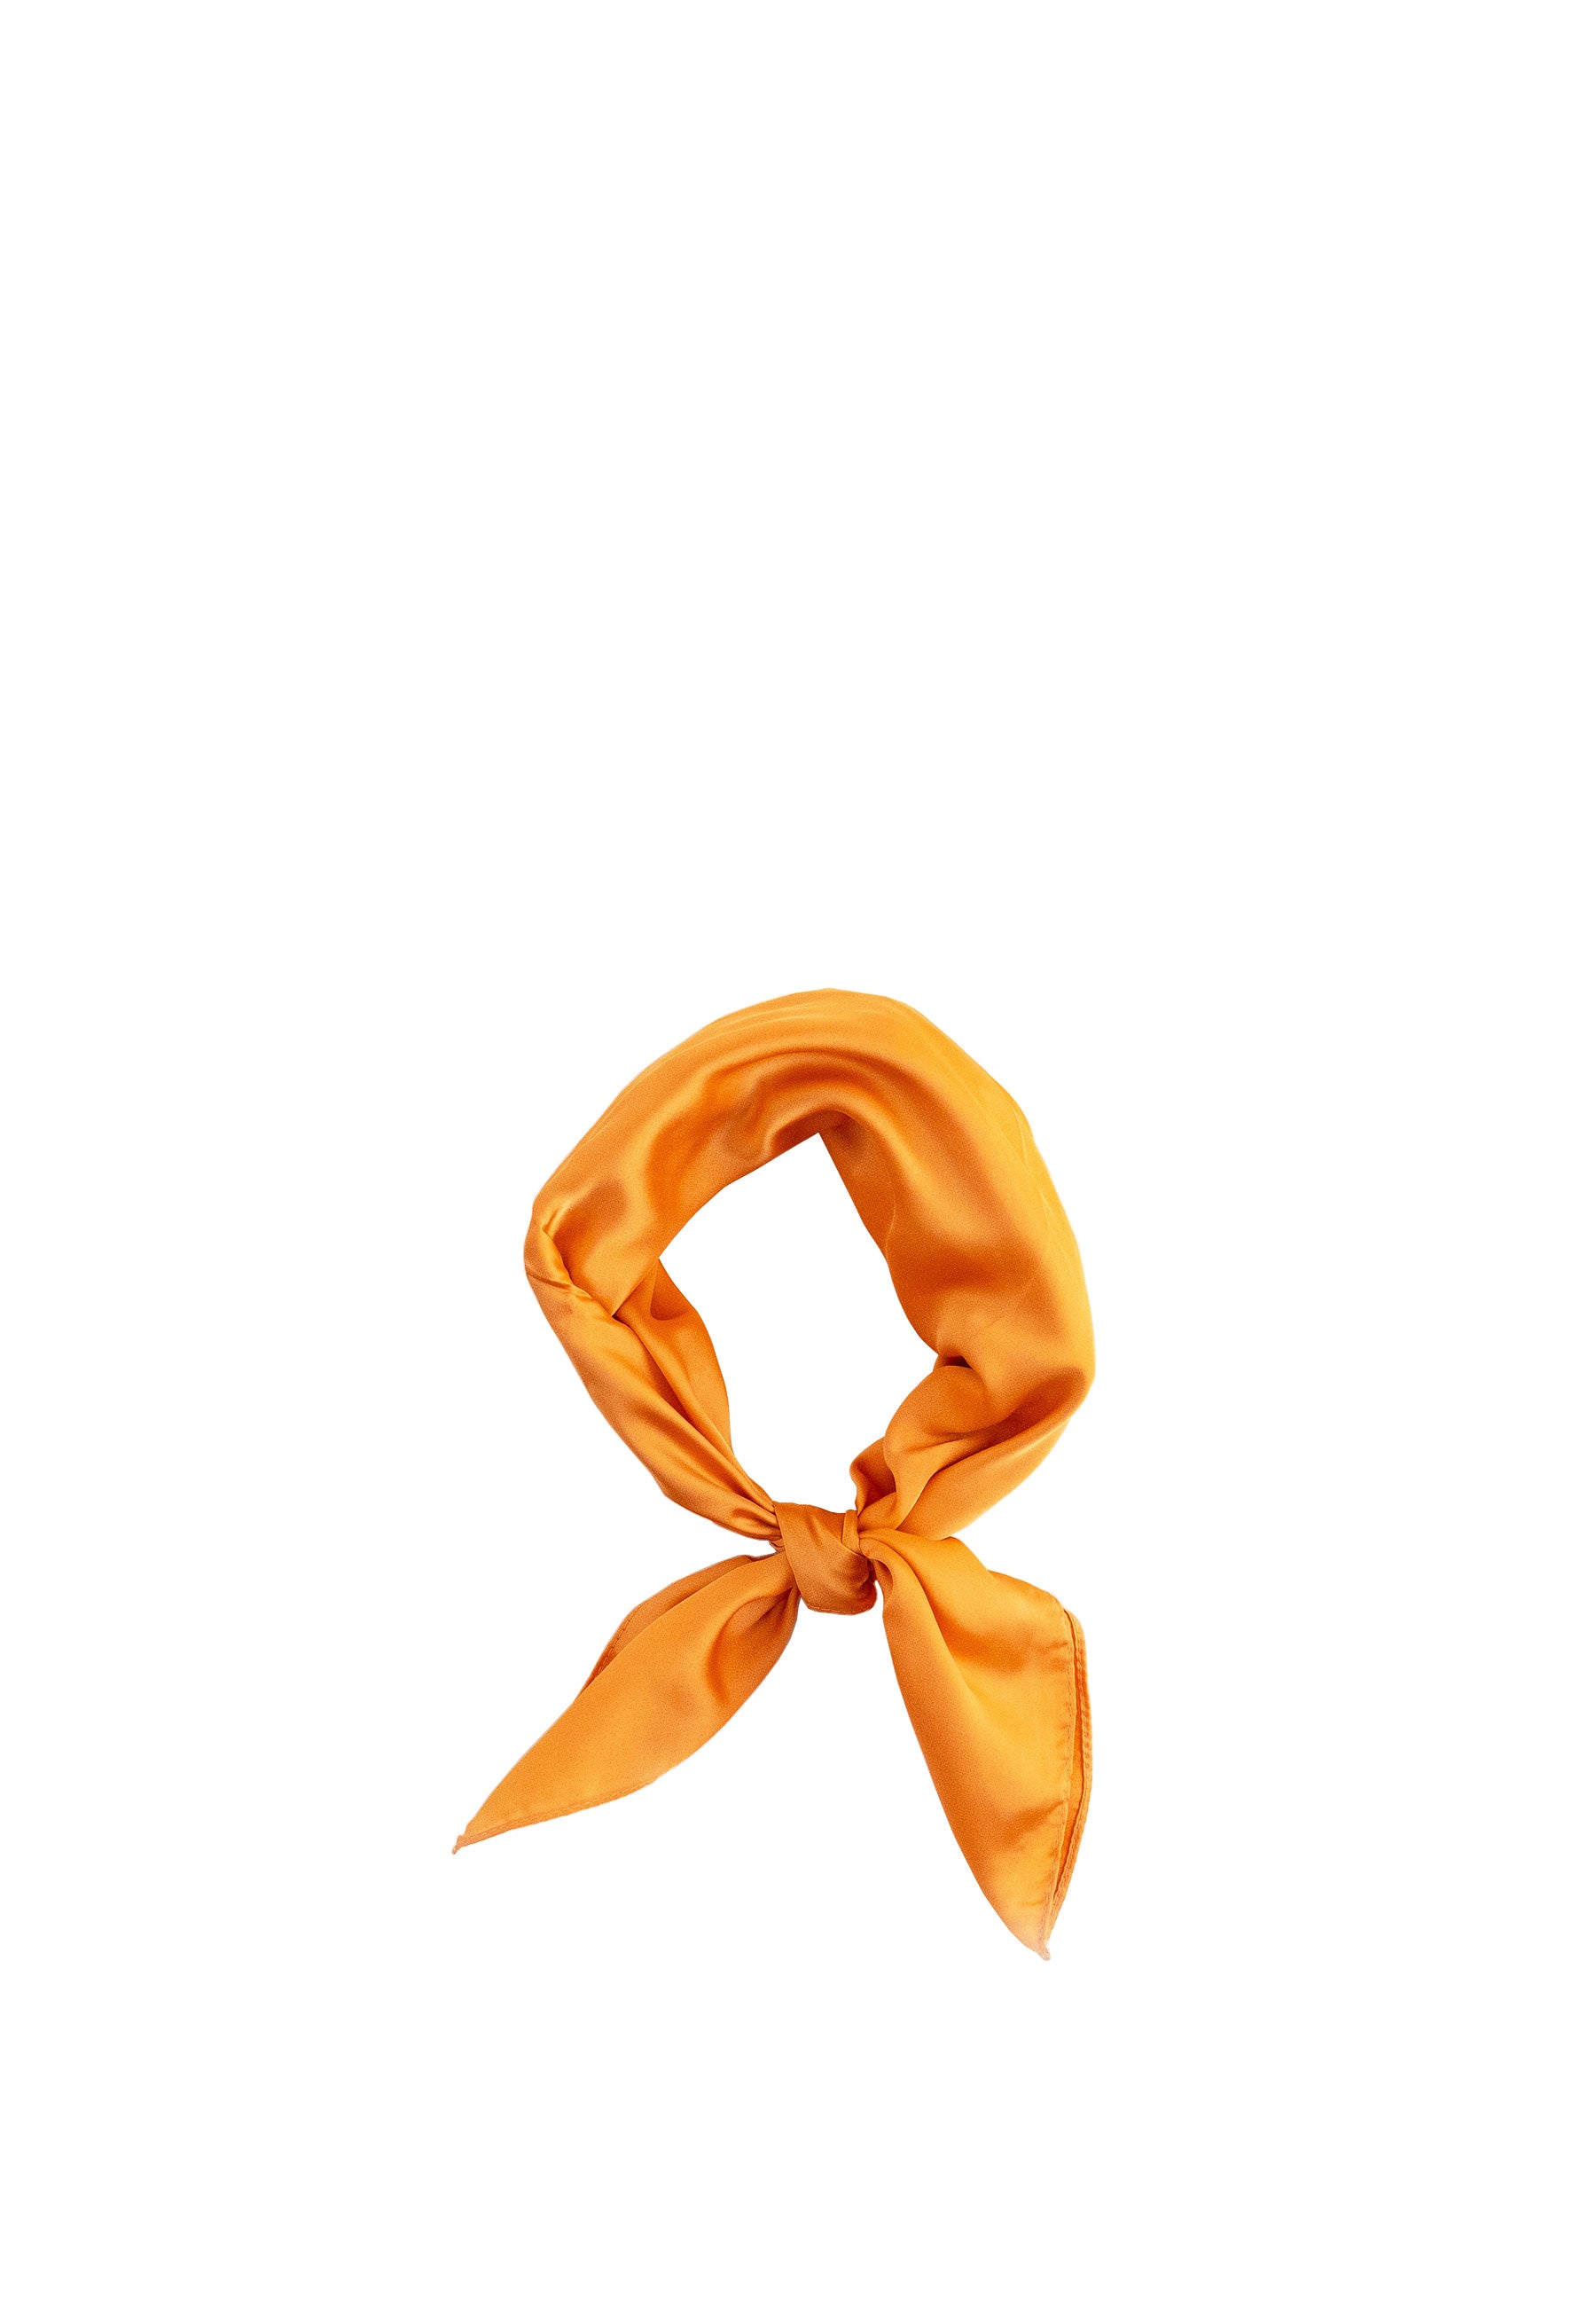 Multiway Headscarf in Orange | Bandana | Satin | Top | Neck Tie | Summer | Glam | Beach | Holiday | Party | Festival | Brunch | Women's Accessory | Accessories 